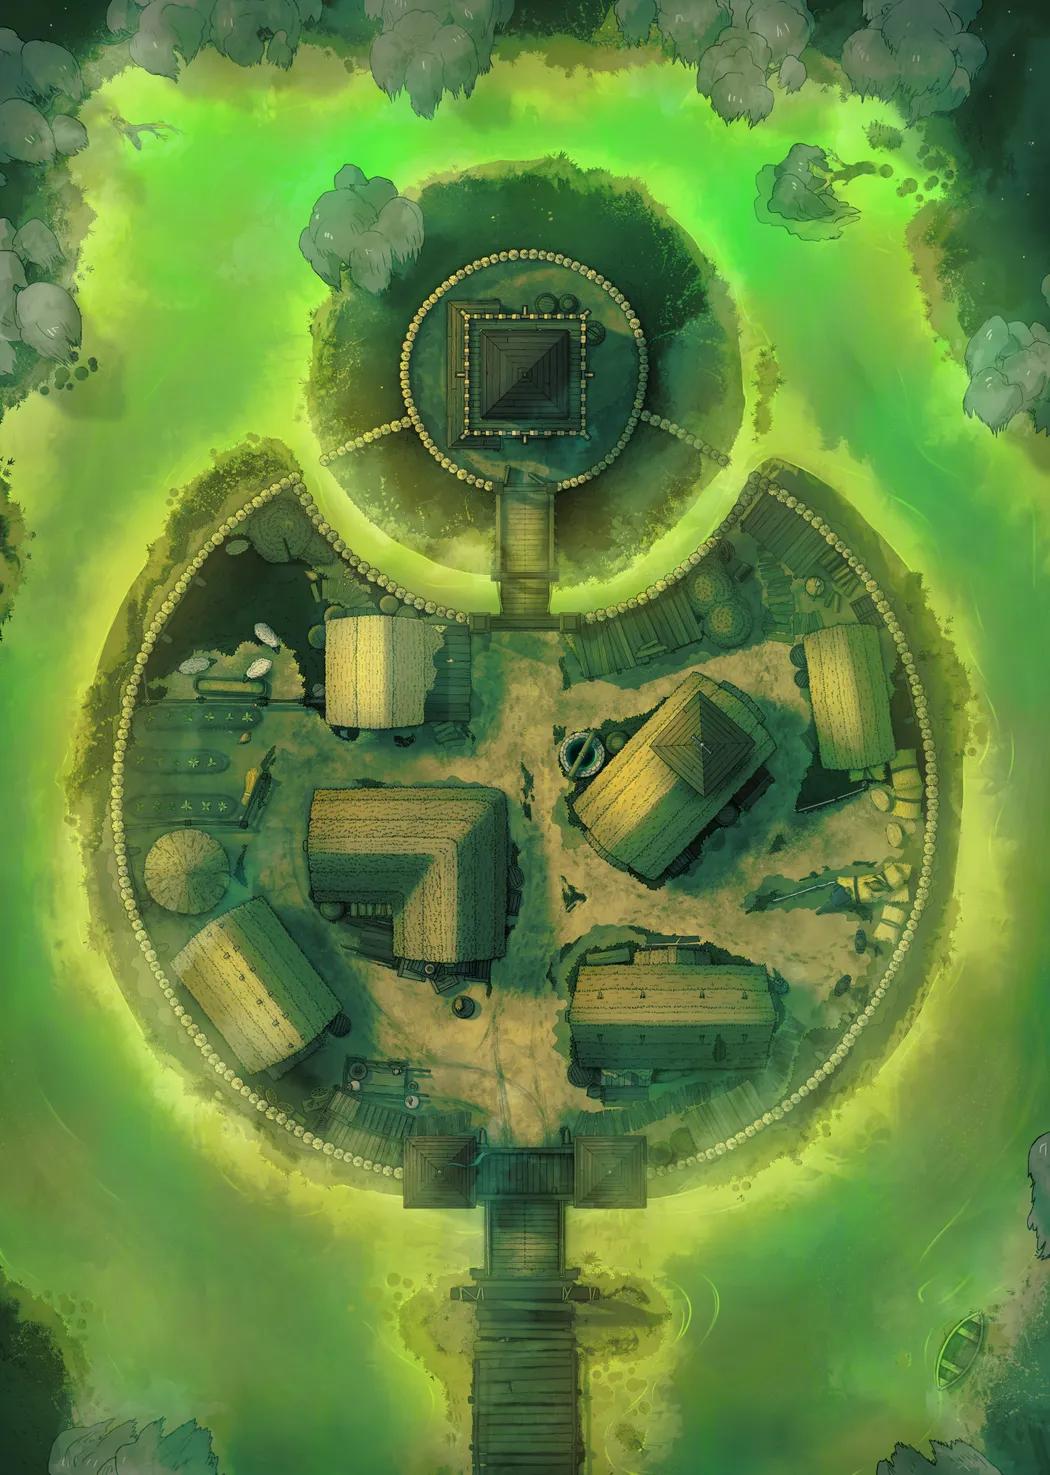 Motte and Bailey Castle map, Toxic Moat variant